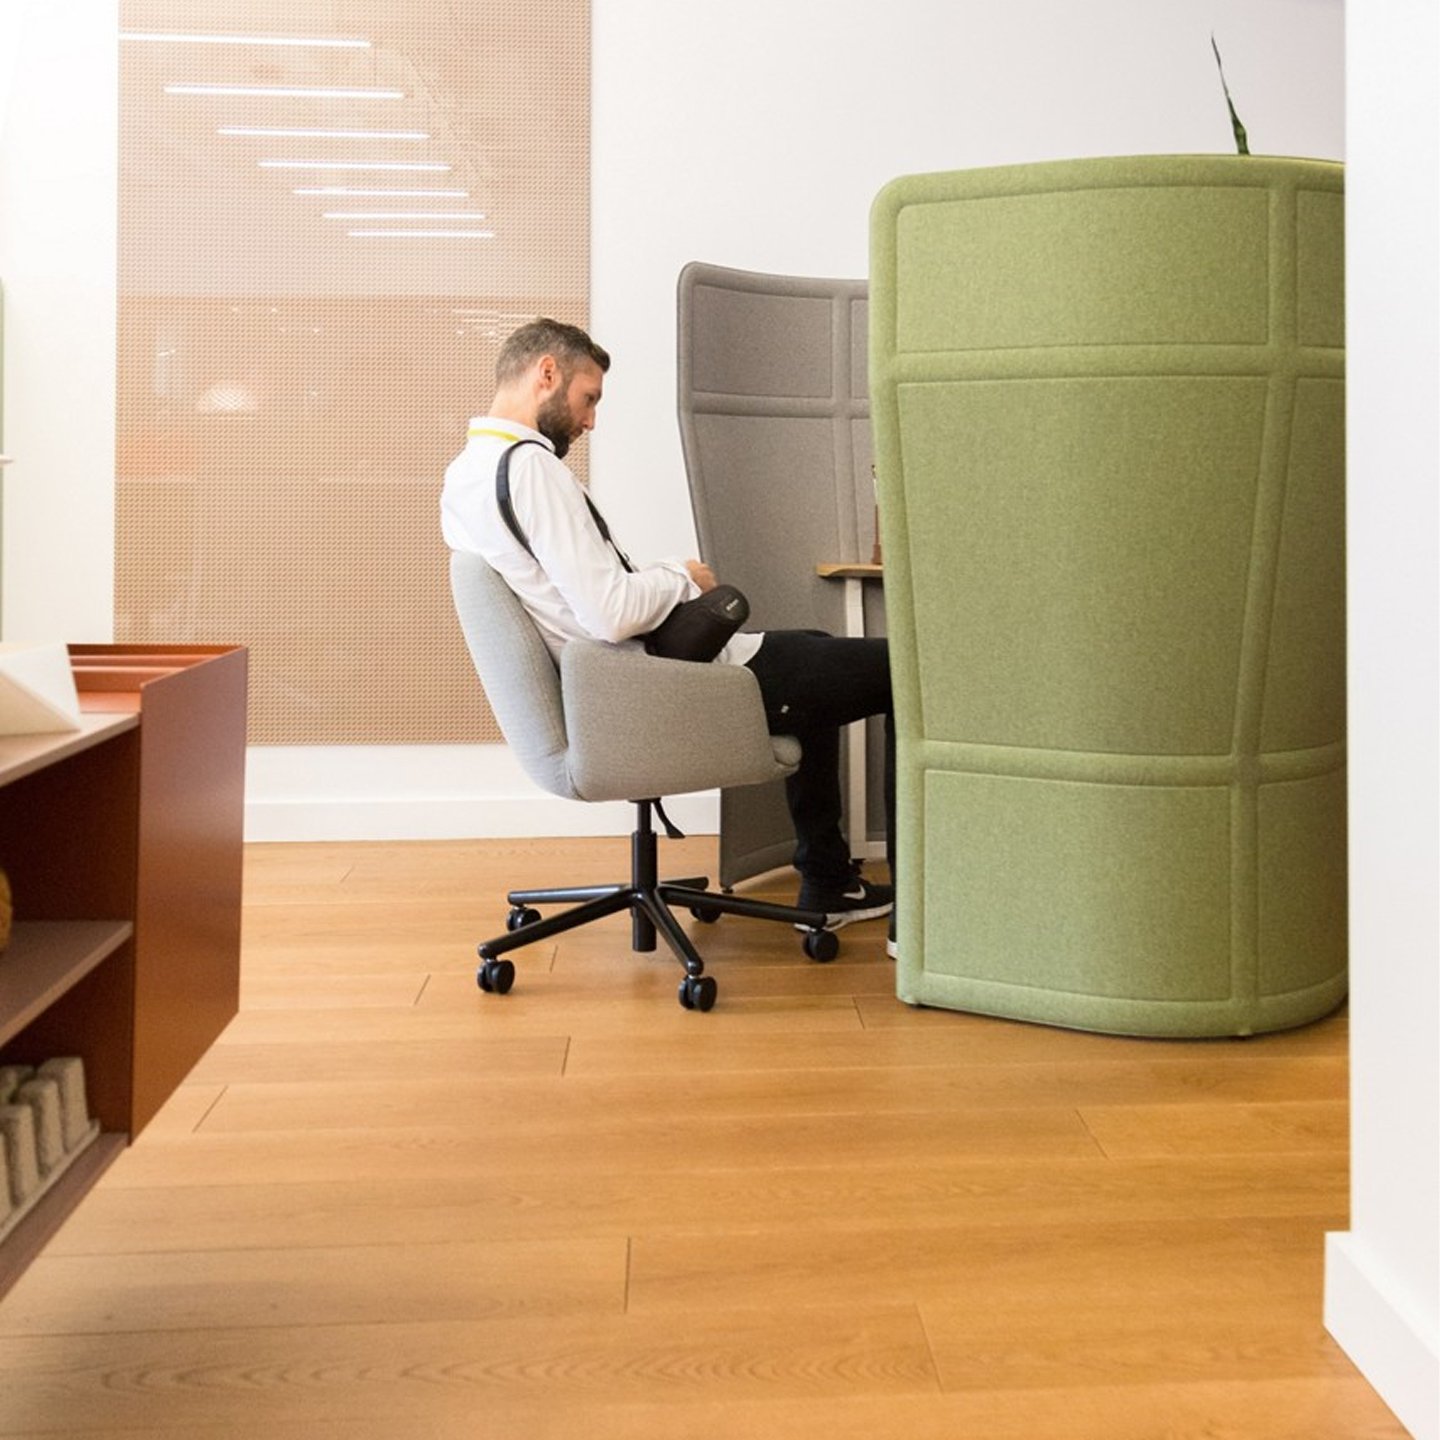 Haworth Openest Privacy Desk Booth in grey and green color with employee in grey chair at the desk in open office space